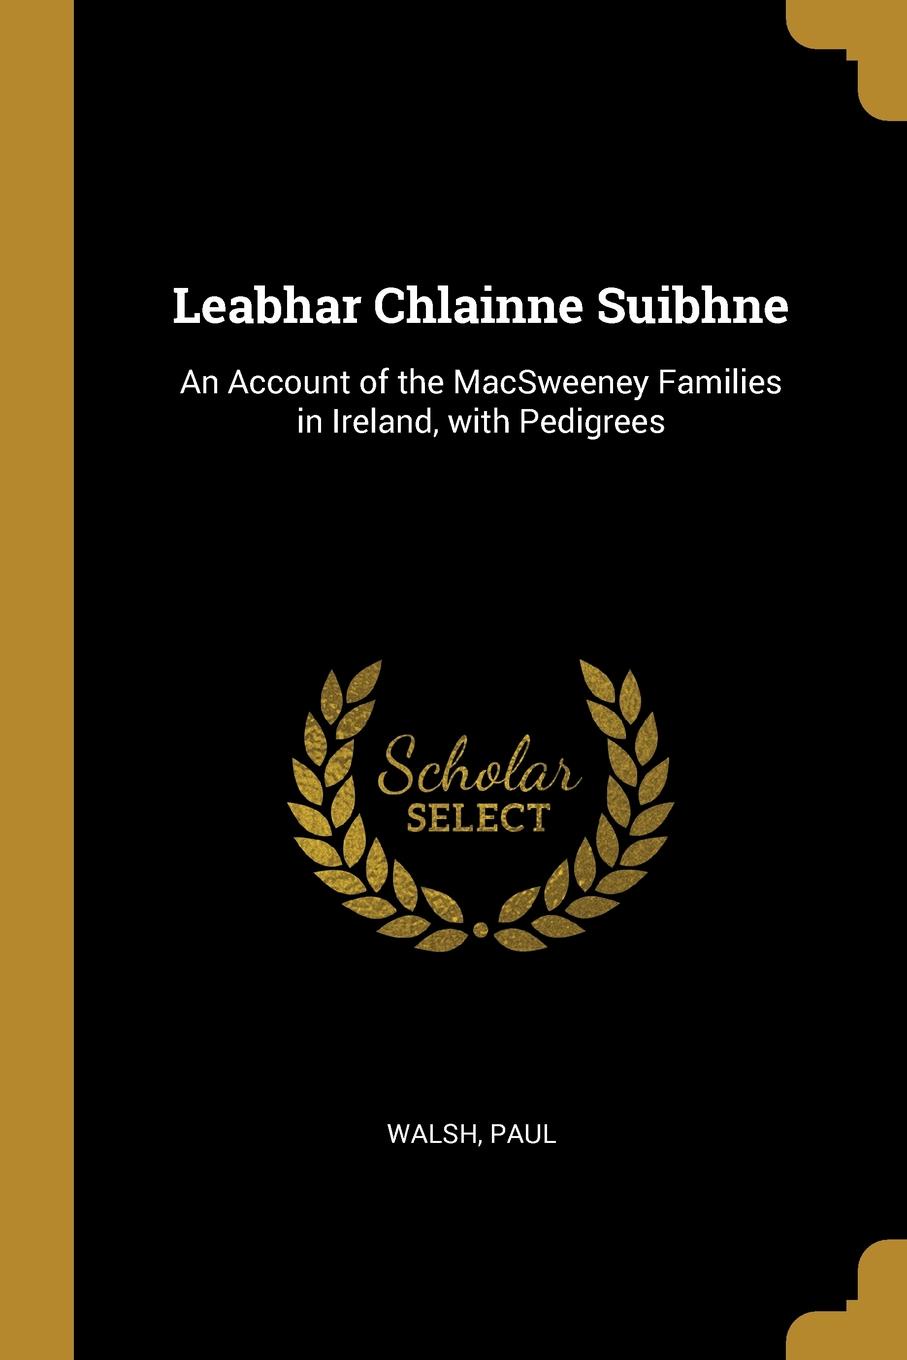 Leabhar Chlainne Suibhne. An Account of the MacSweeney Families in Ireland, with Pedigrees